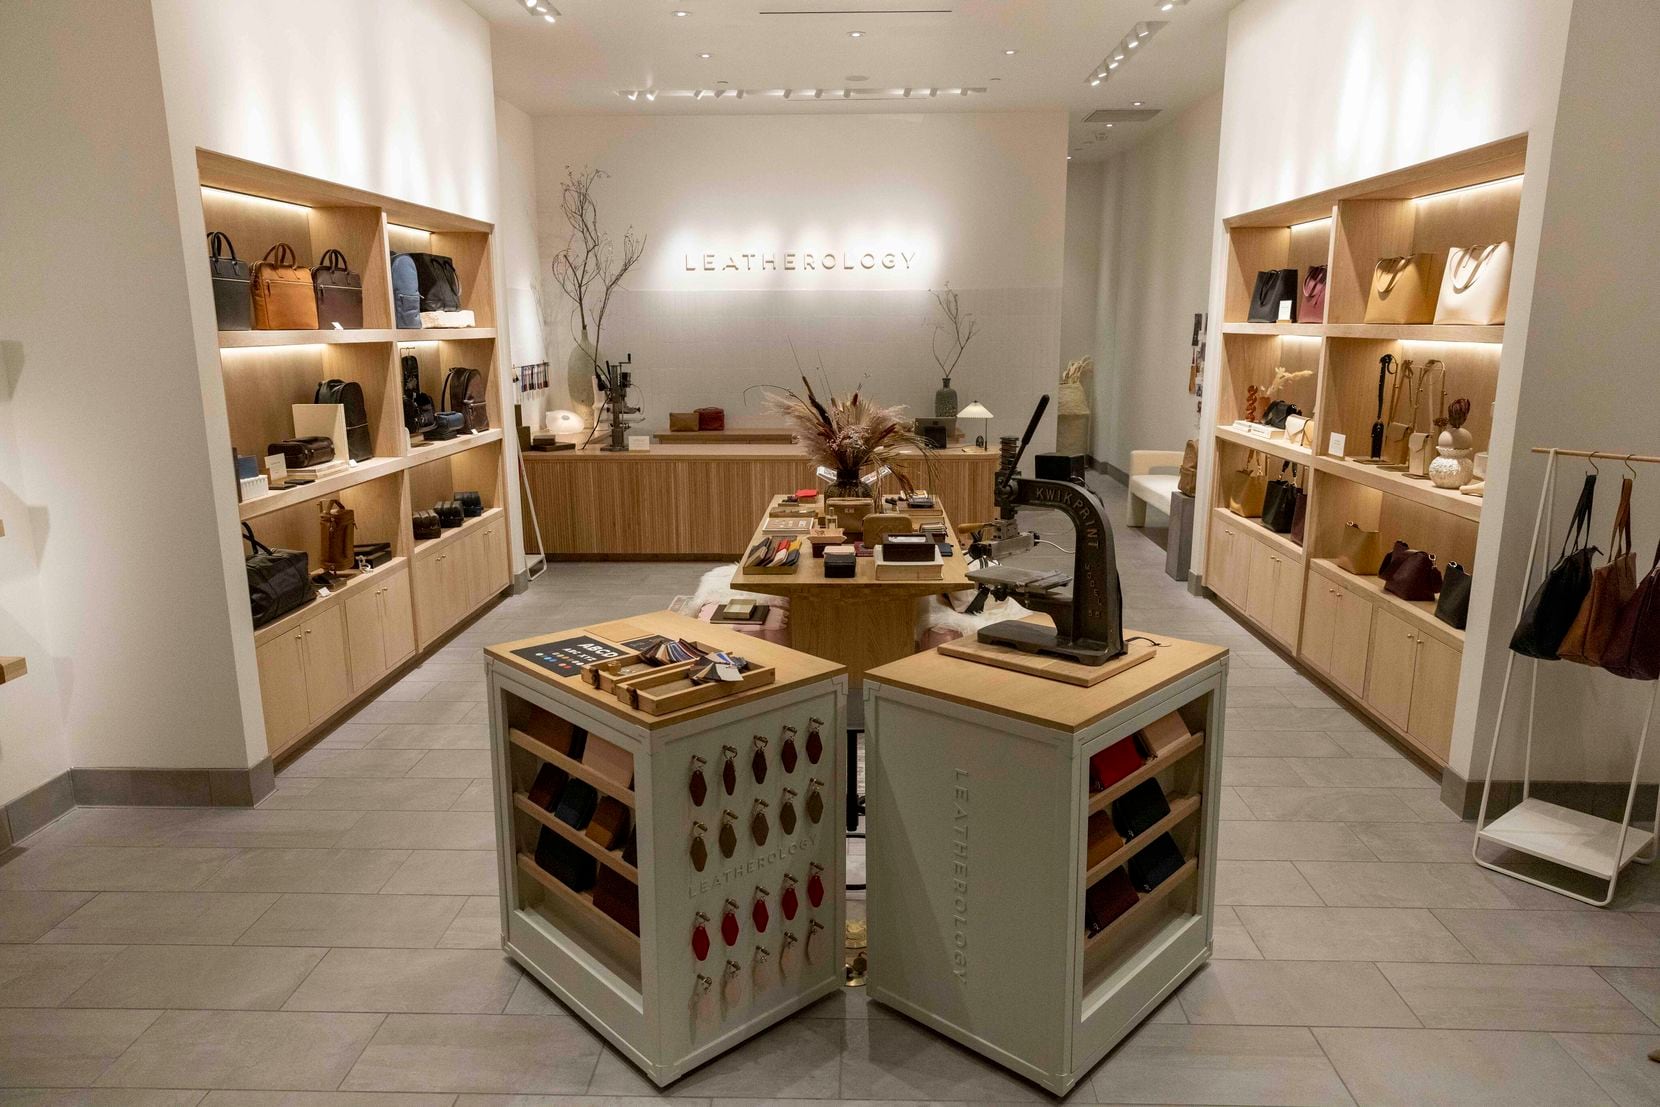 This is the first weekend for Leatherology at NorthPark Center in Dallas. 